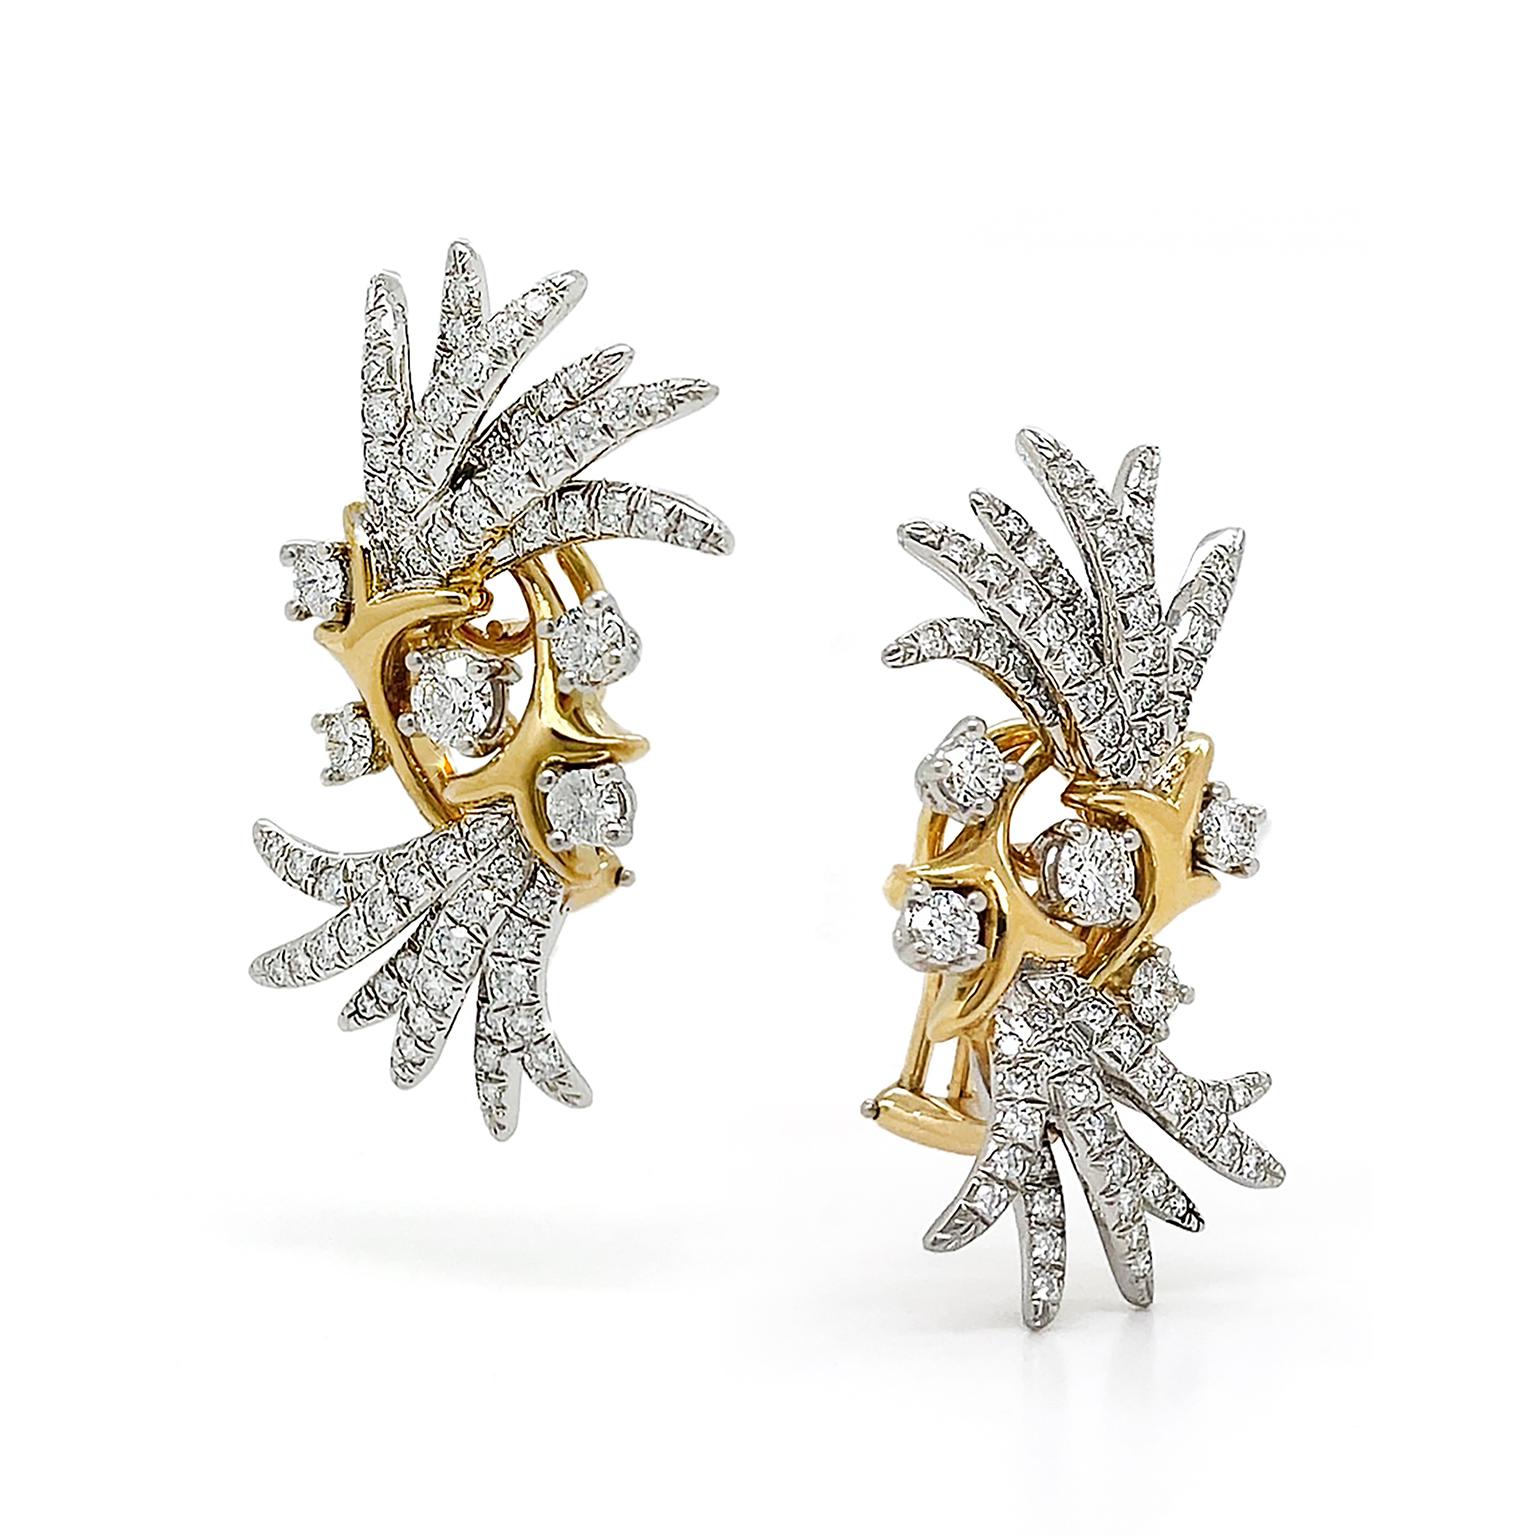 Sparkling diamonds erupt from vivid 18k yellow gold in these earrings. Rays of platinum set brilliant cut diamonds overlap and extend from within the V-shape of a tapered 18k yellow gold design. 18k yellow gold is the only combination with the most